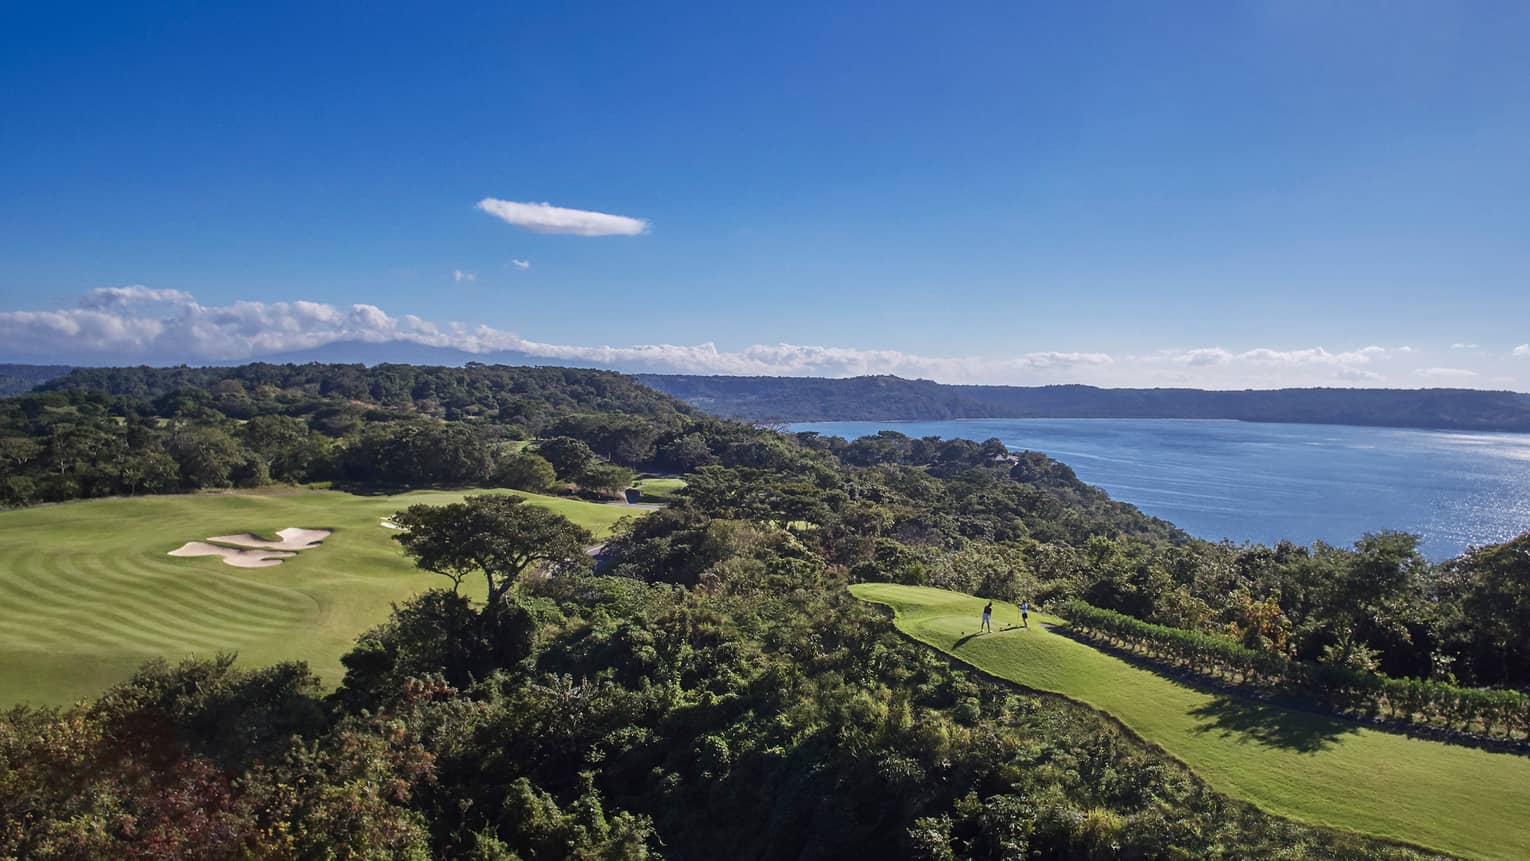 Looking down at large golf course green, trees on top of mountain, two players on hole, ocean view